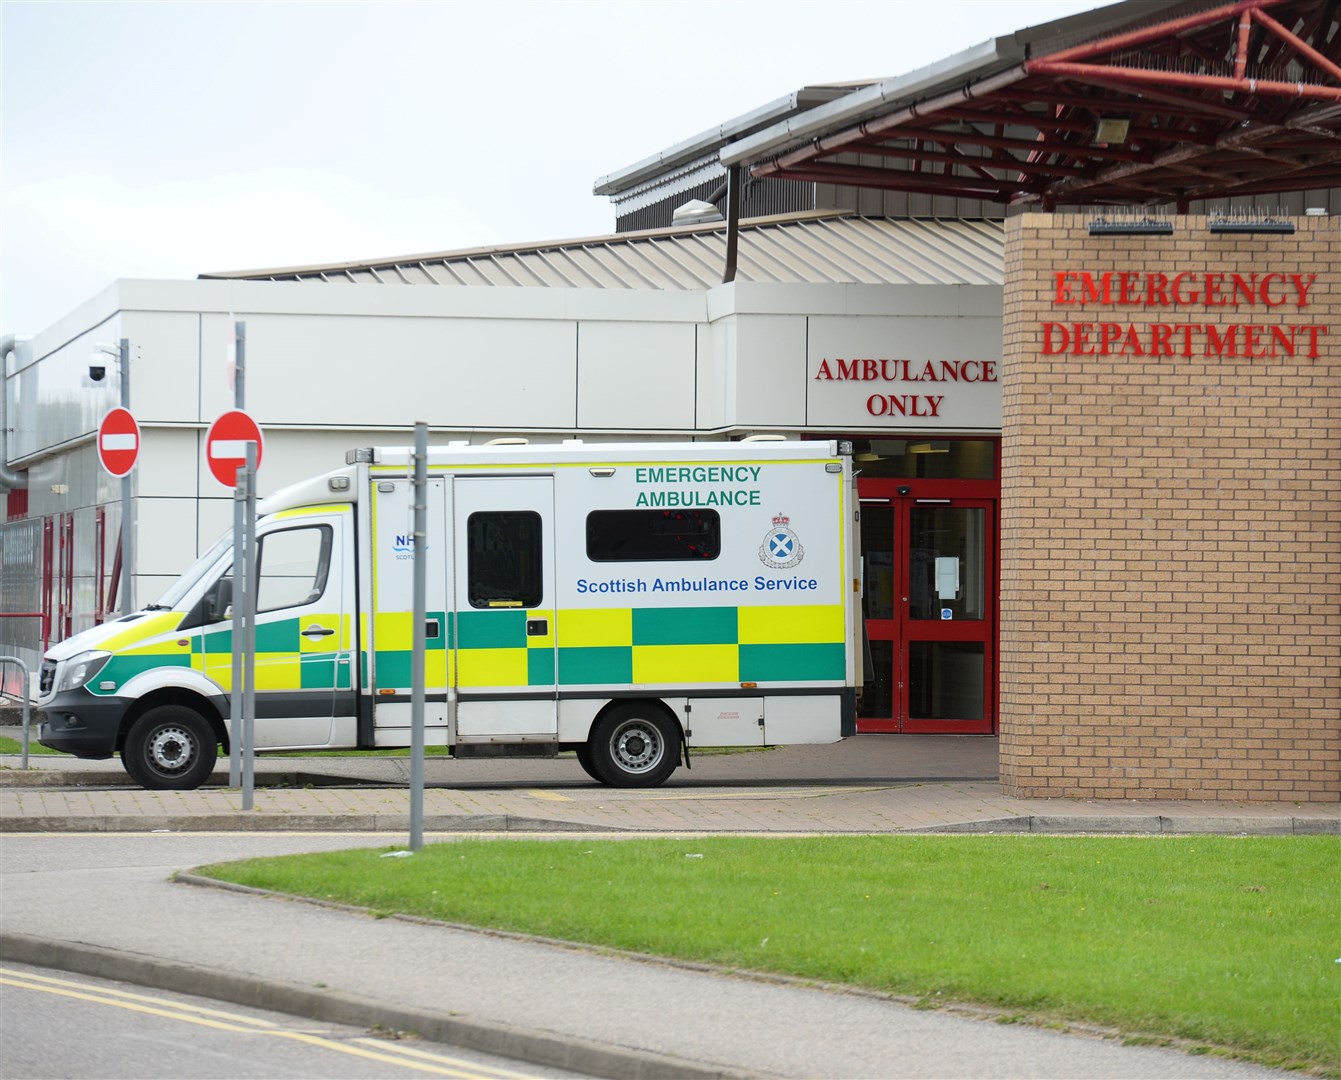 Accident and Emergency is facing high demand, prompting an appeal for patience and use of NHS 24 for less urgent situations.